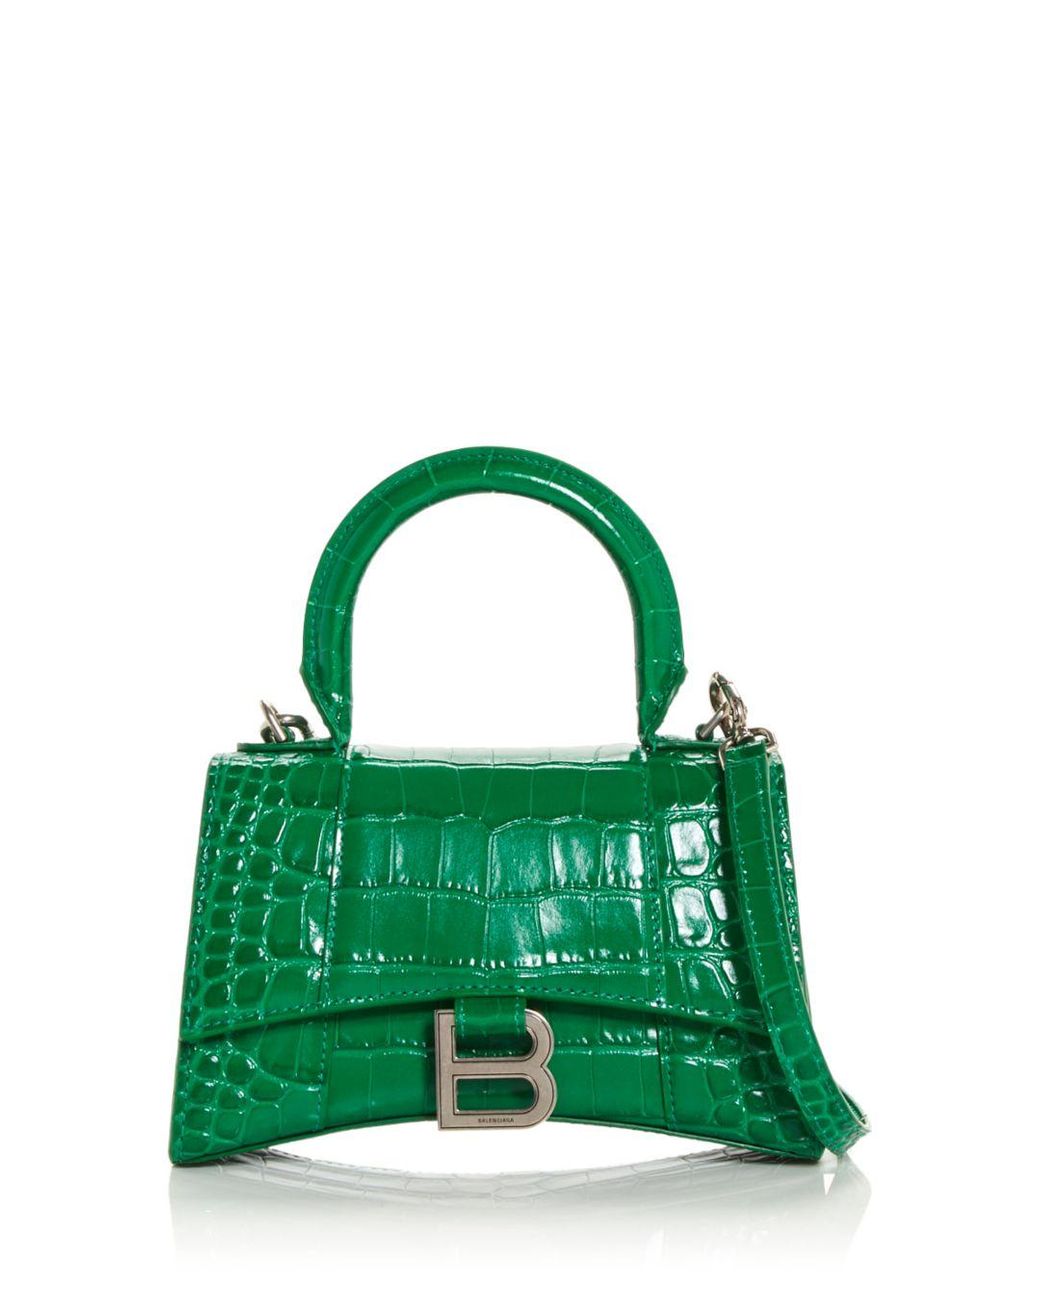 Balenciaga Hourglass Xs Leather Top Handle Bag in Green - Lyst